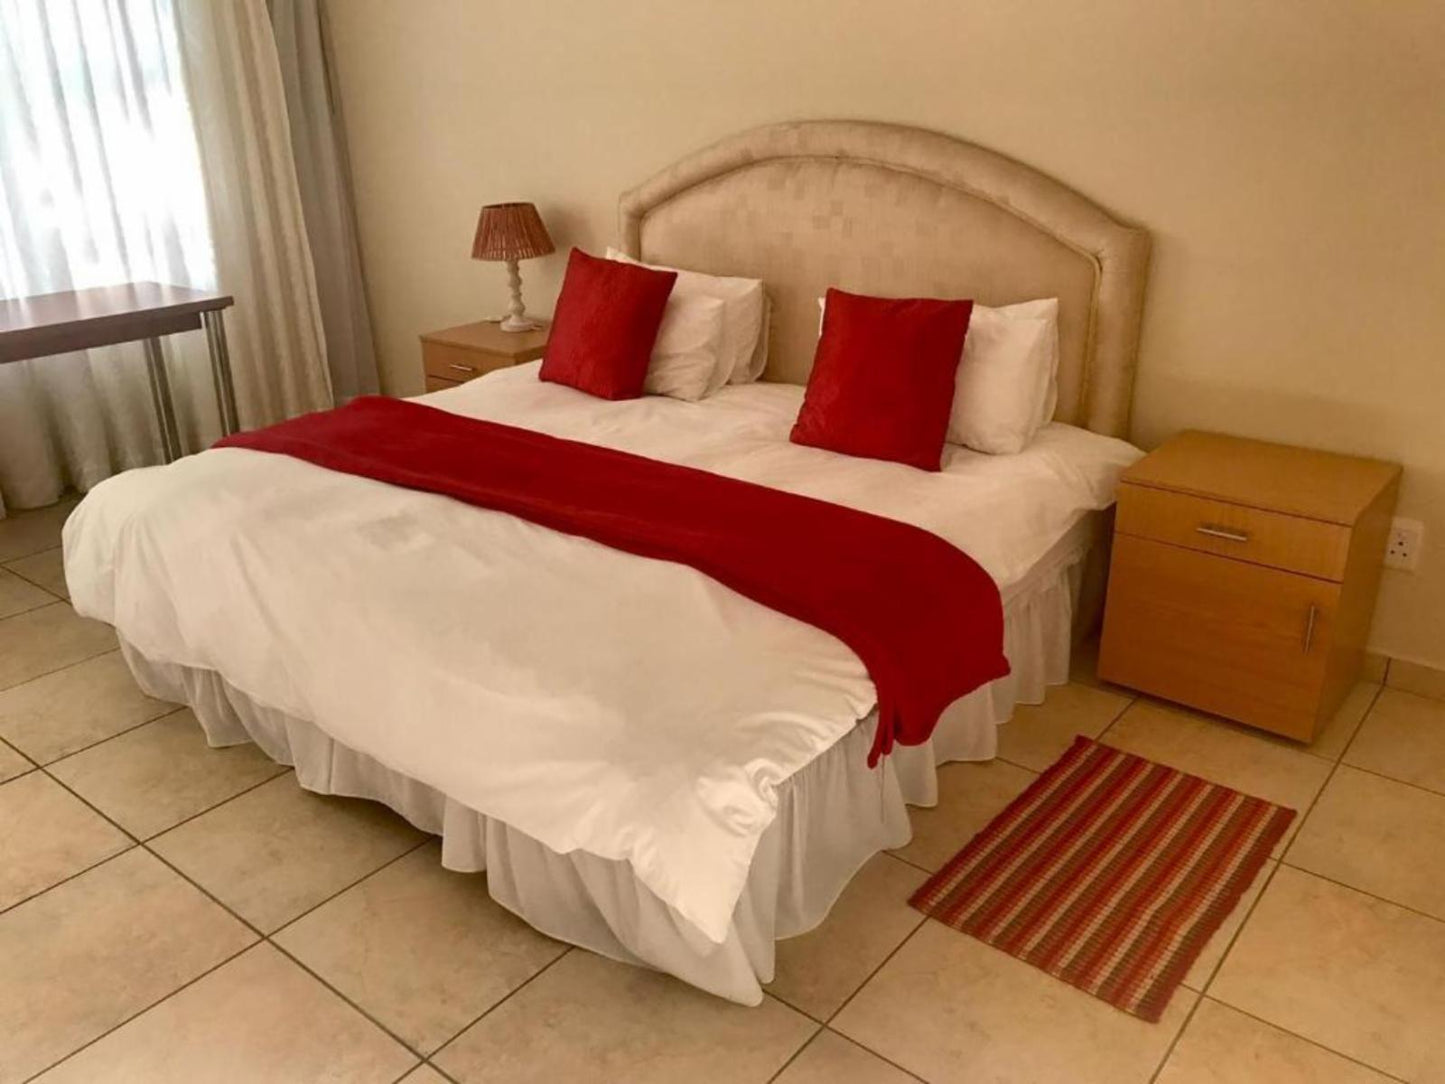 Self-catering Two Bedroom Apartment @ Anka Lodge